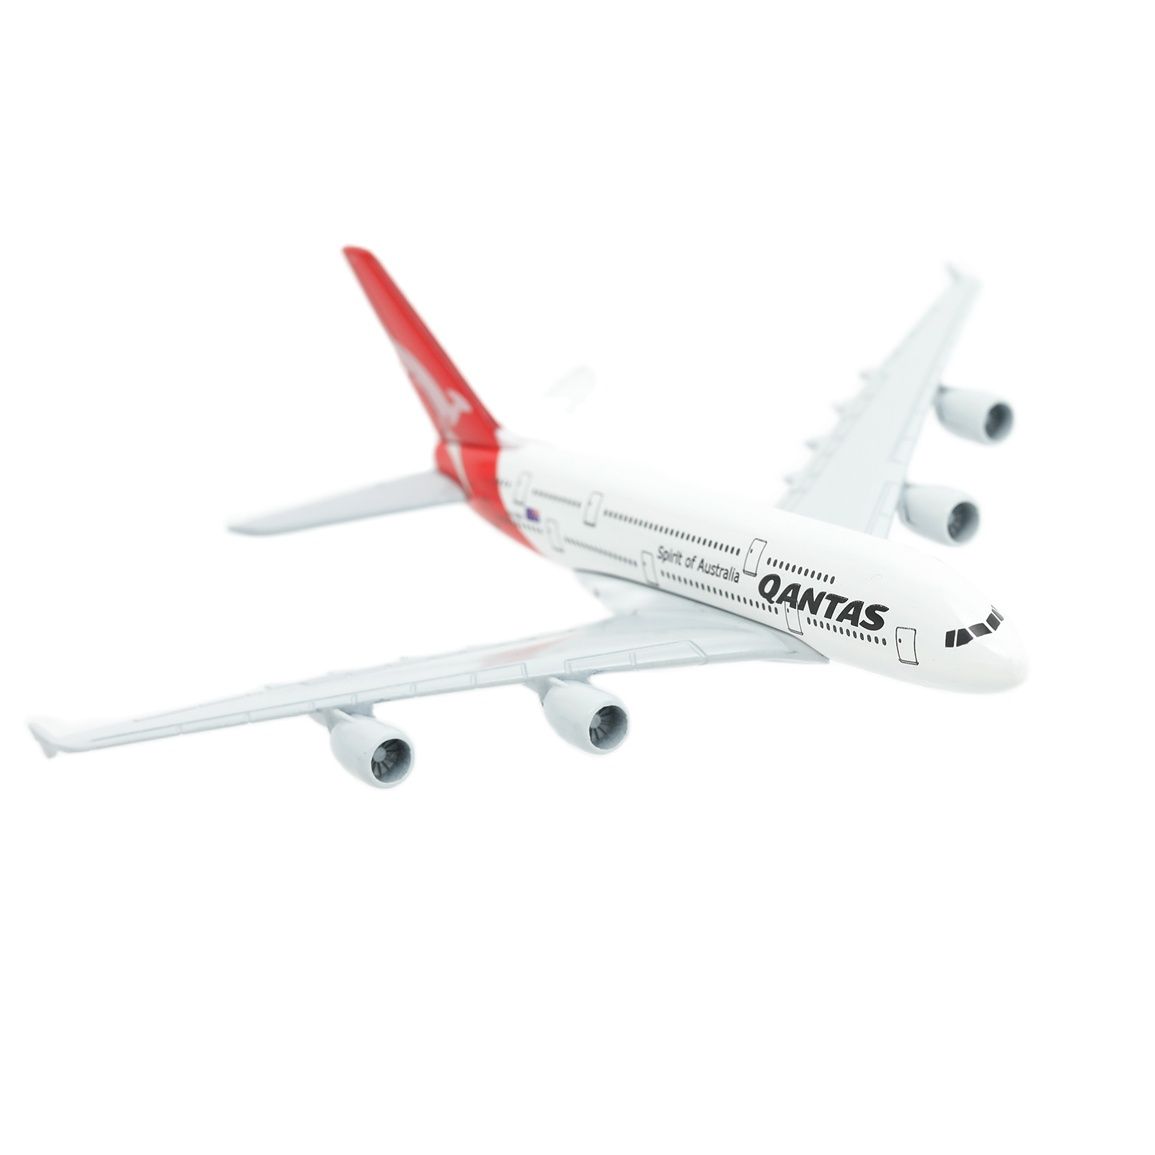 Scale 1:400 Metal Aircraft Replica 15cm Emirates Airlines Model Aviation Diecast Miniature Educational Kids Toy for Children Boy